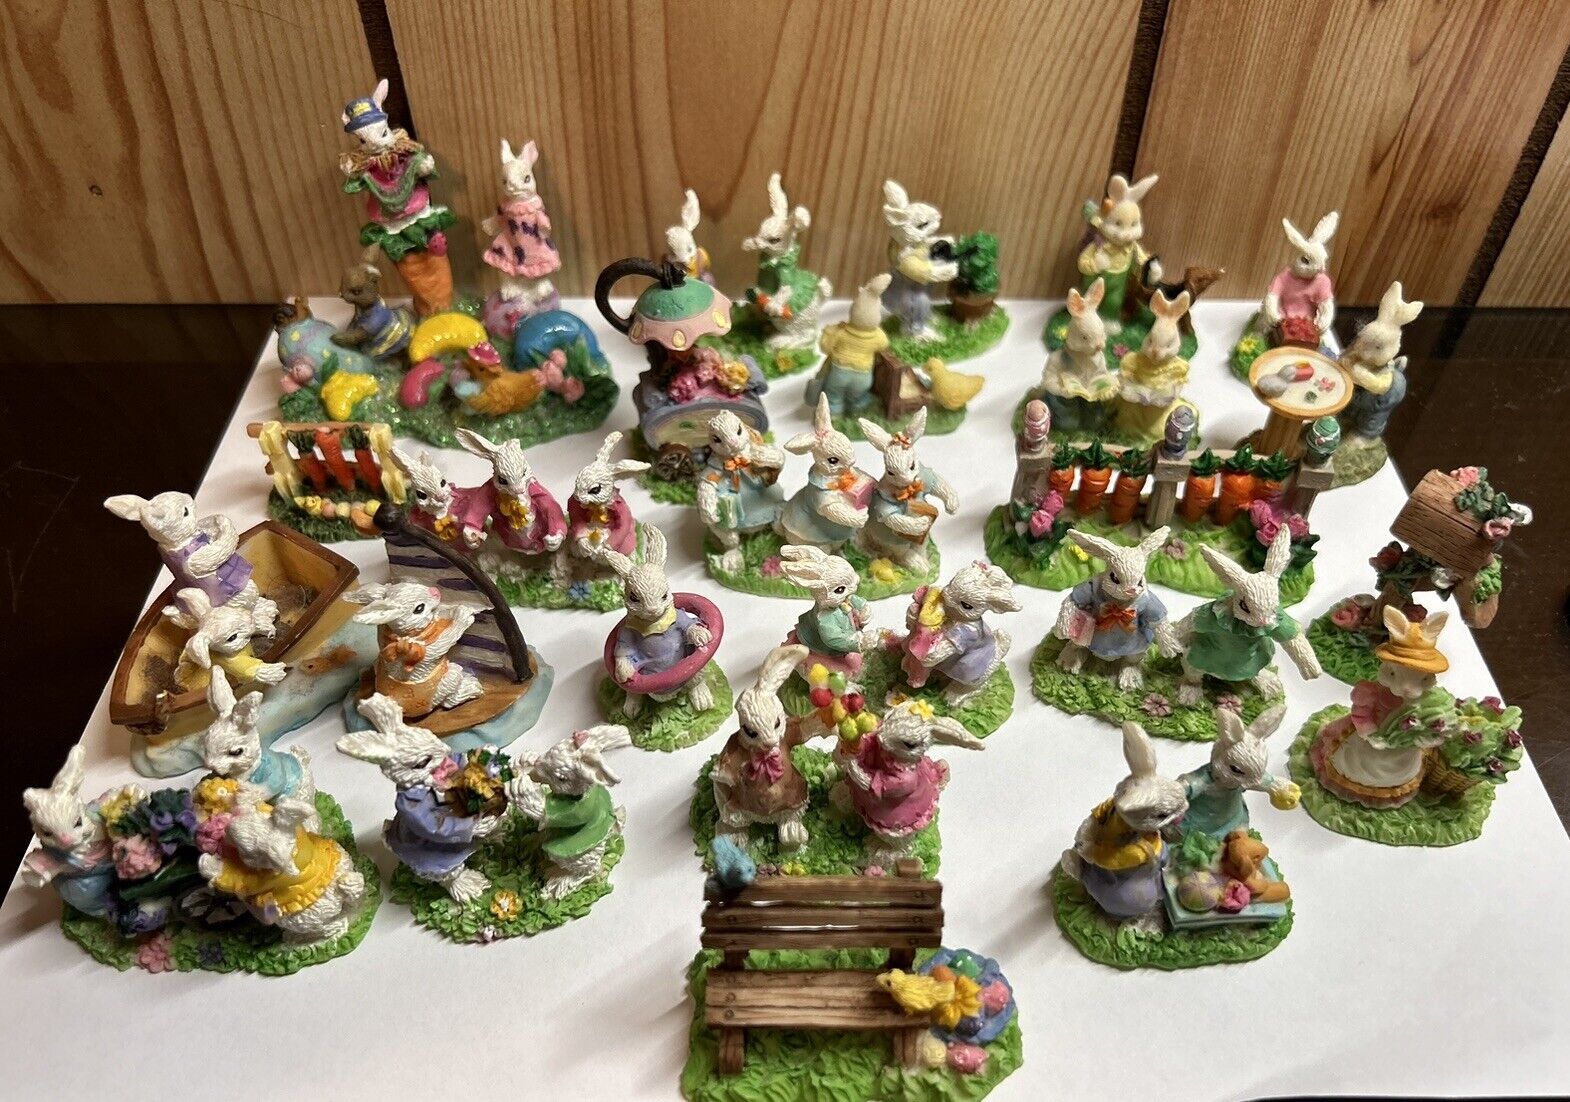 Hoppy Hollow Easter Bunny Village Vintage 25 Pieces Small Figures Collected Cute